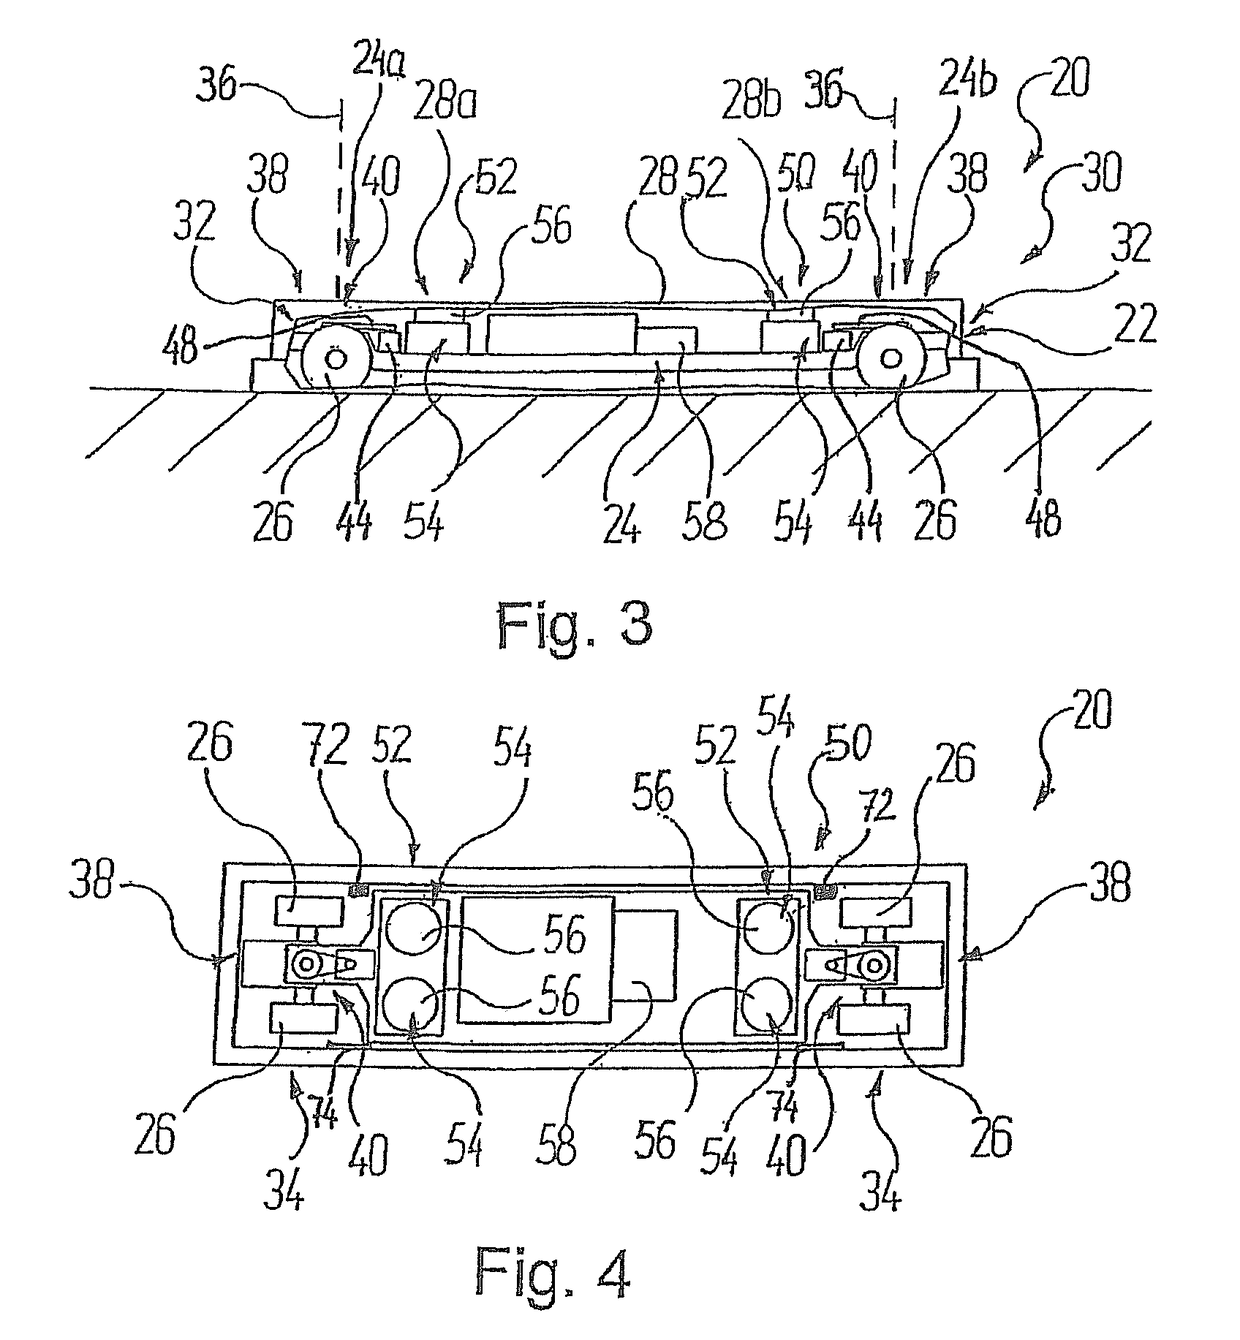 Conveyor system for conveying objects and control process for such a system